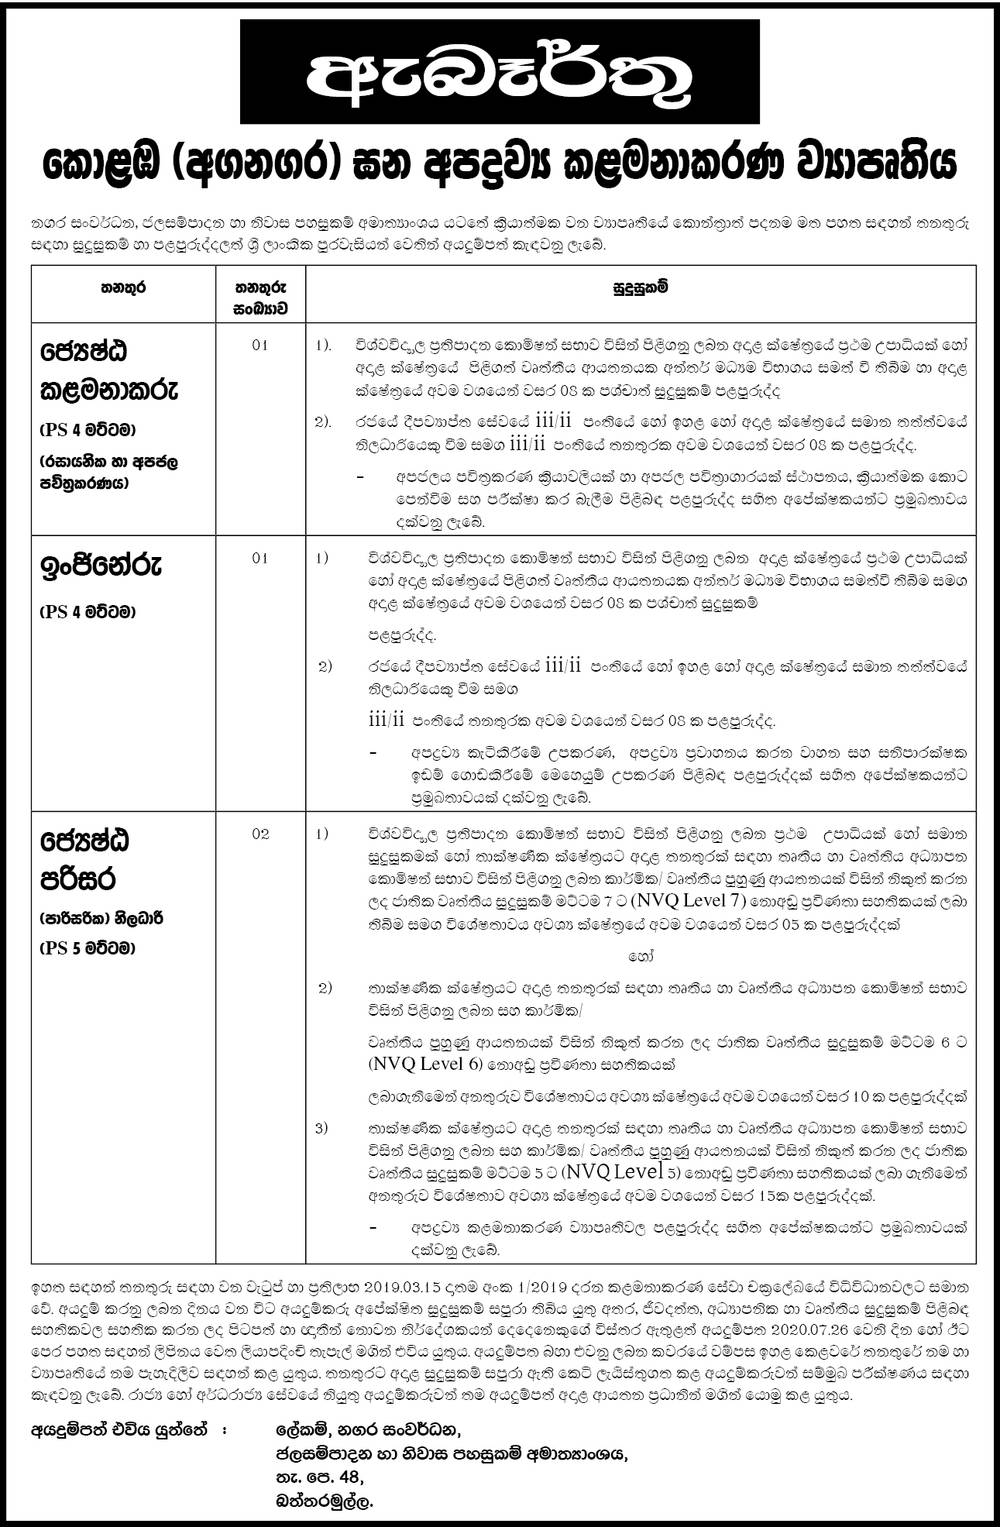 Senior Manager, Engineer, Senior Environmental Officer – Metro Colombo Solid Waste Management Project